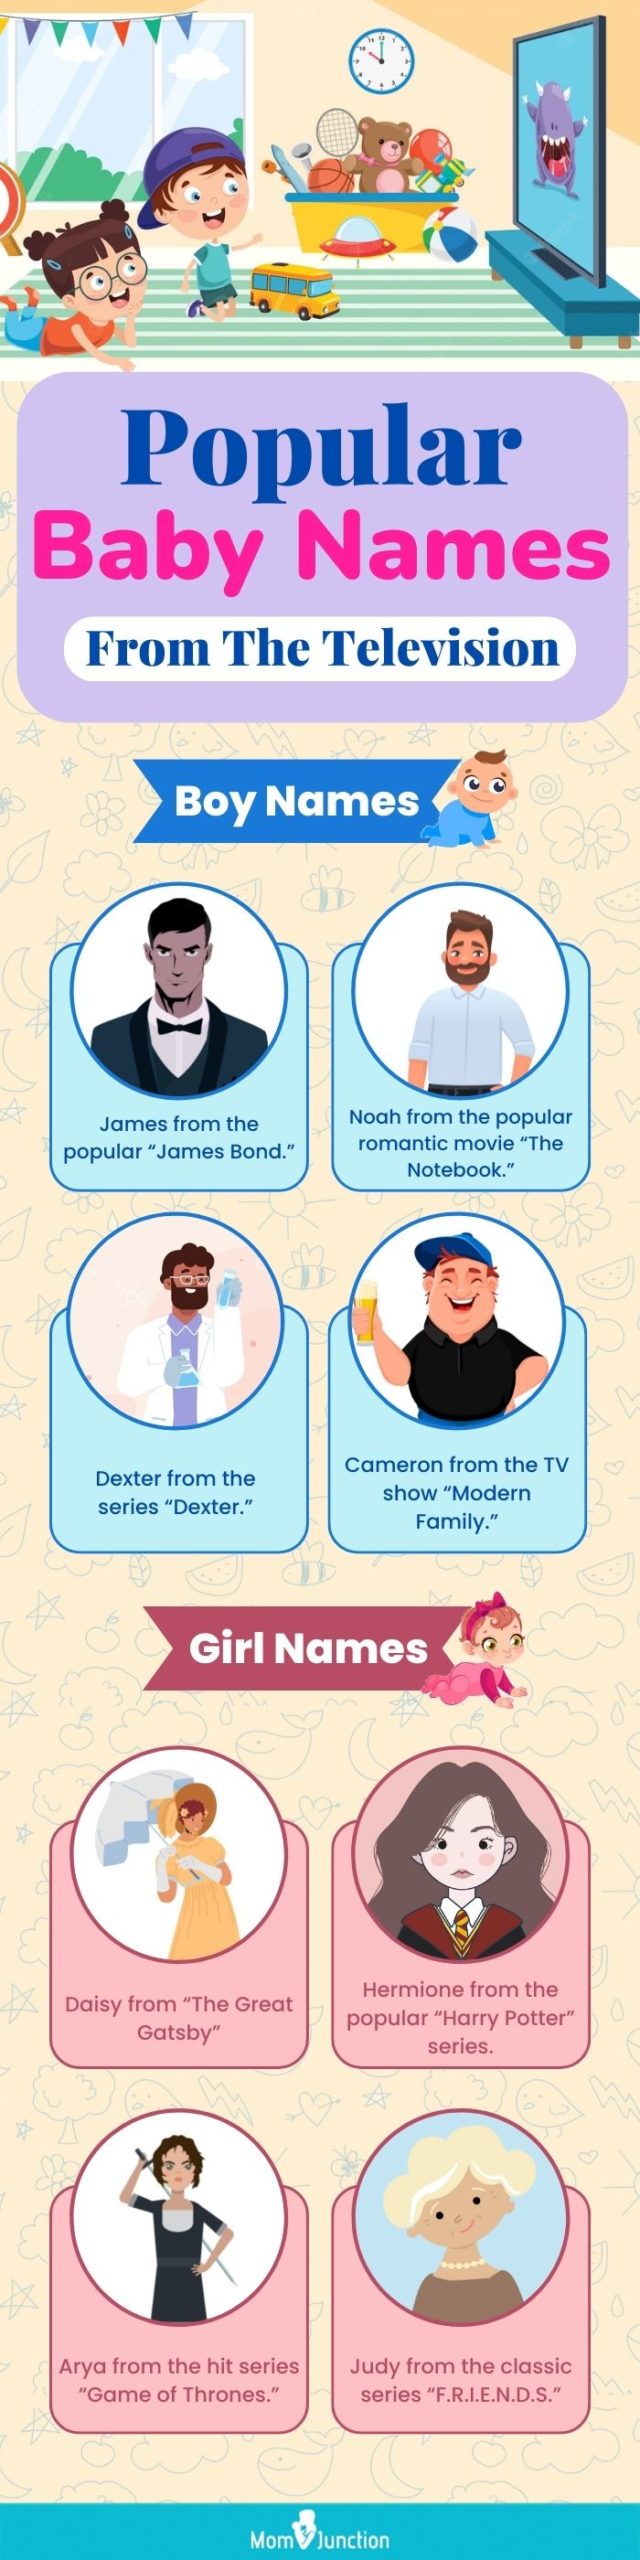 popular baby names from the television (infographic)